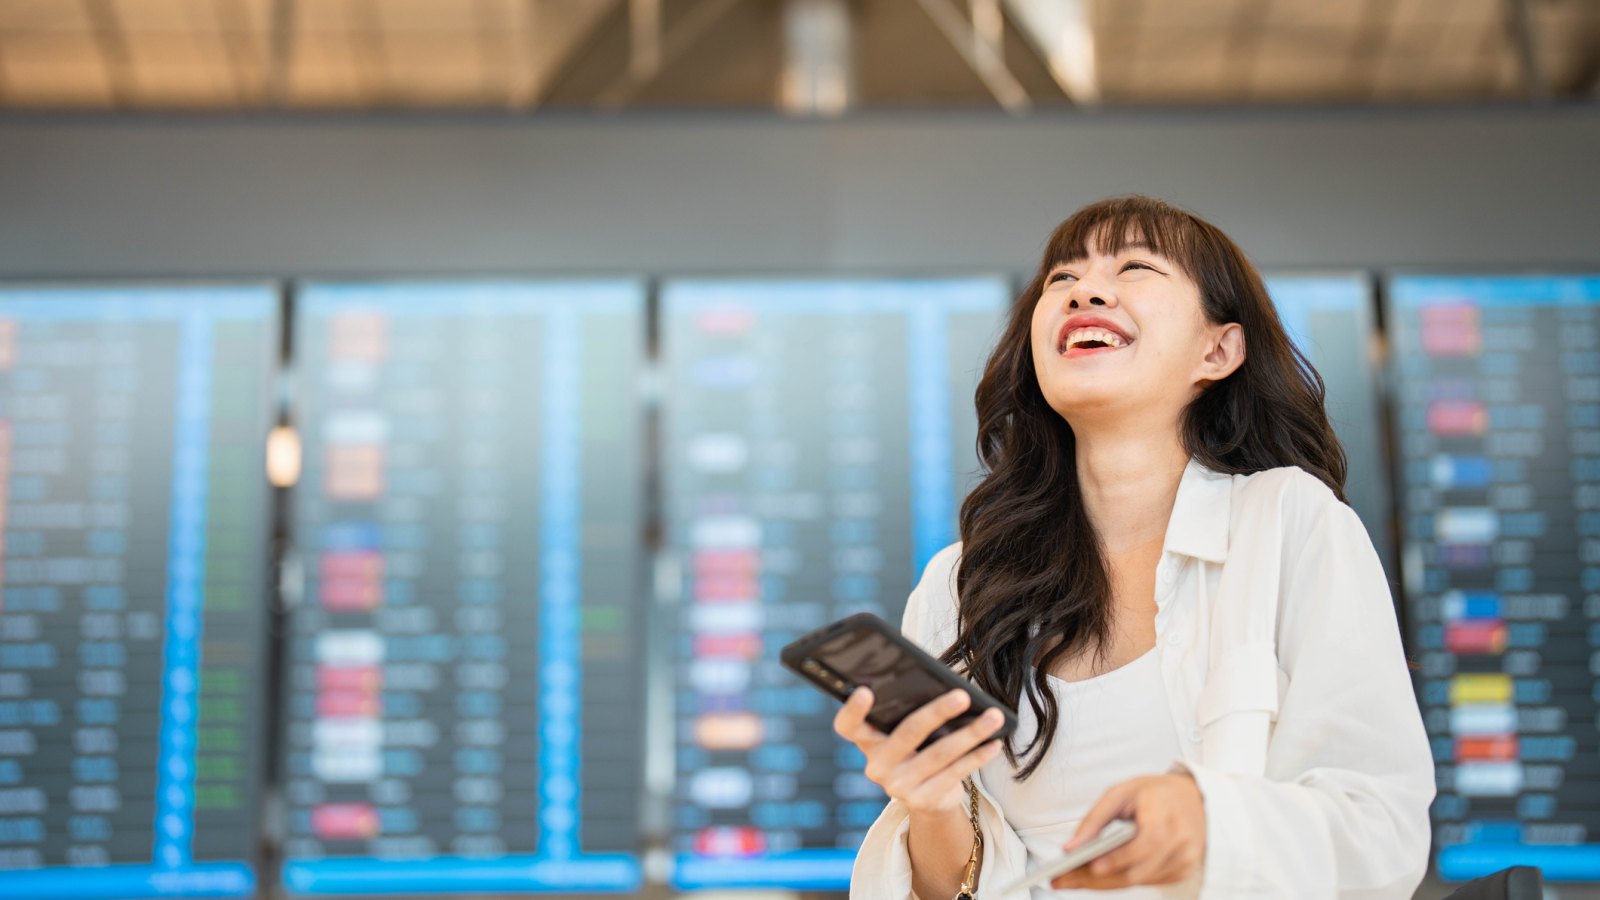 Smiling young woman text messaging on smartphone while waiting for her flight in airport lounge